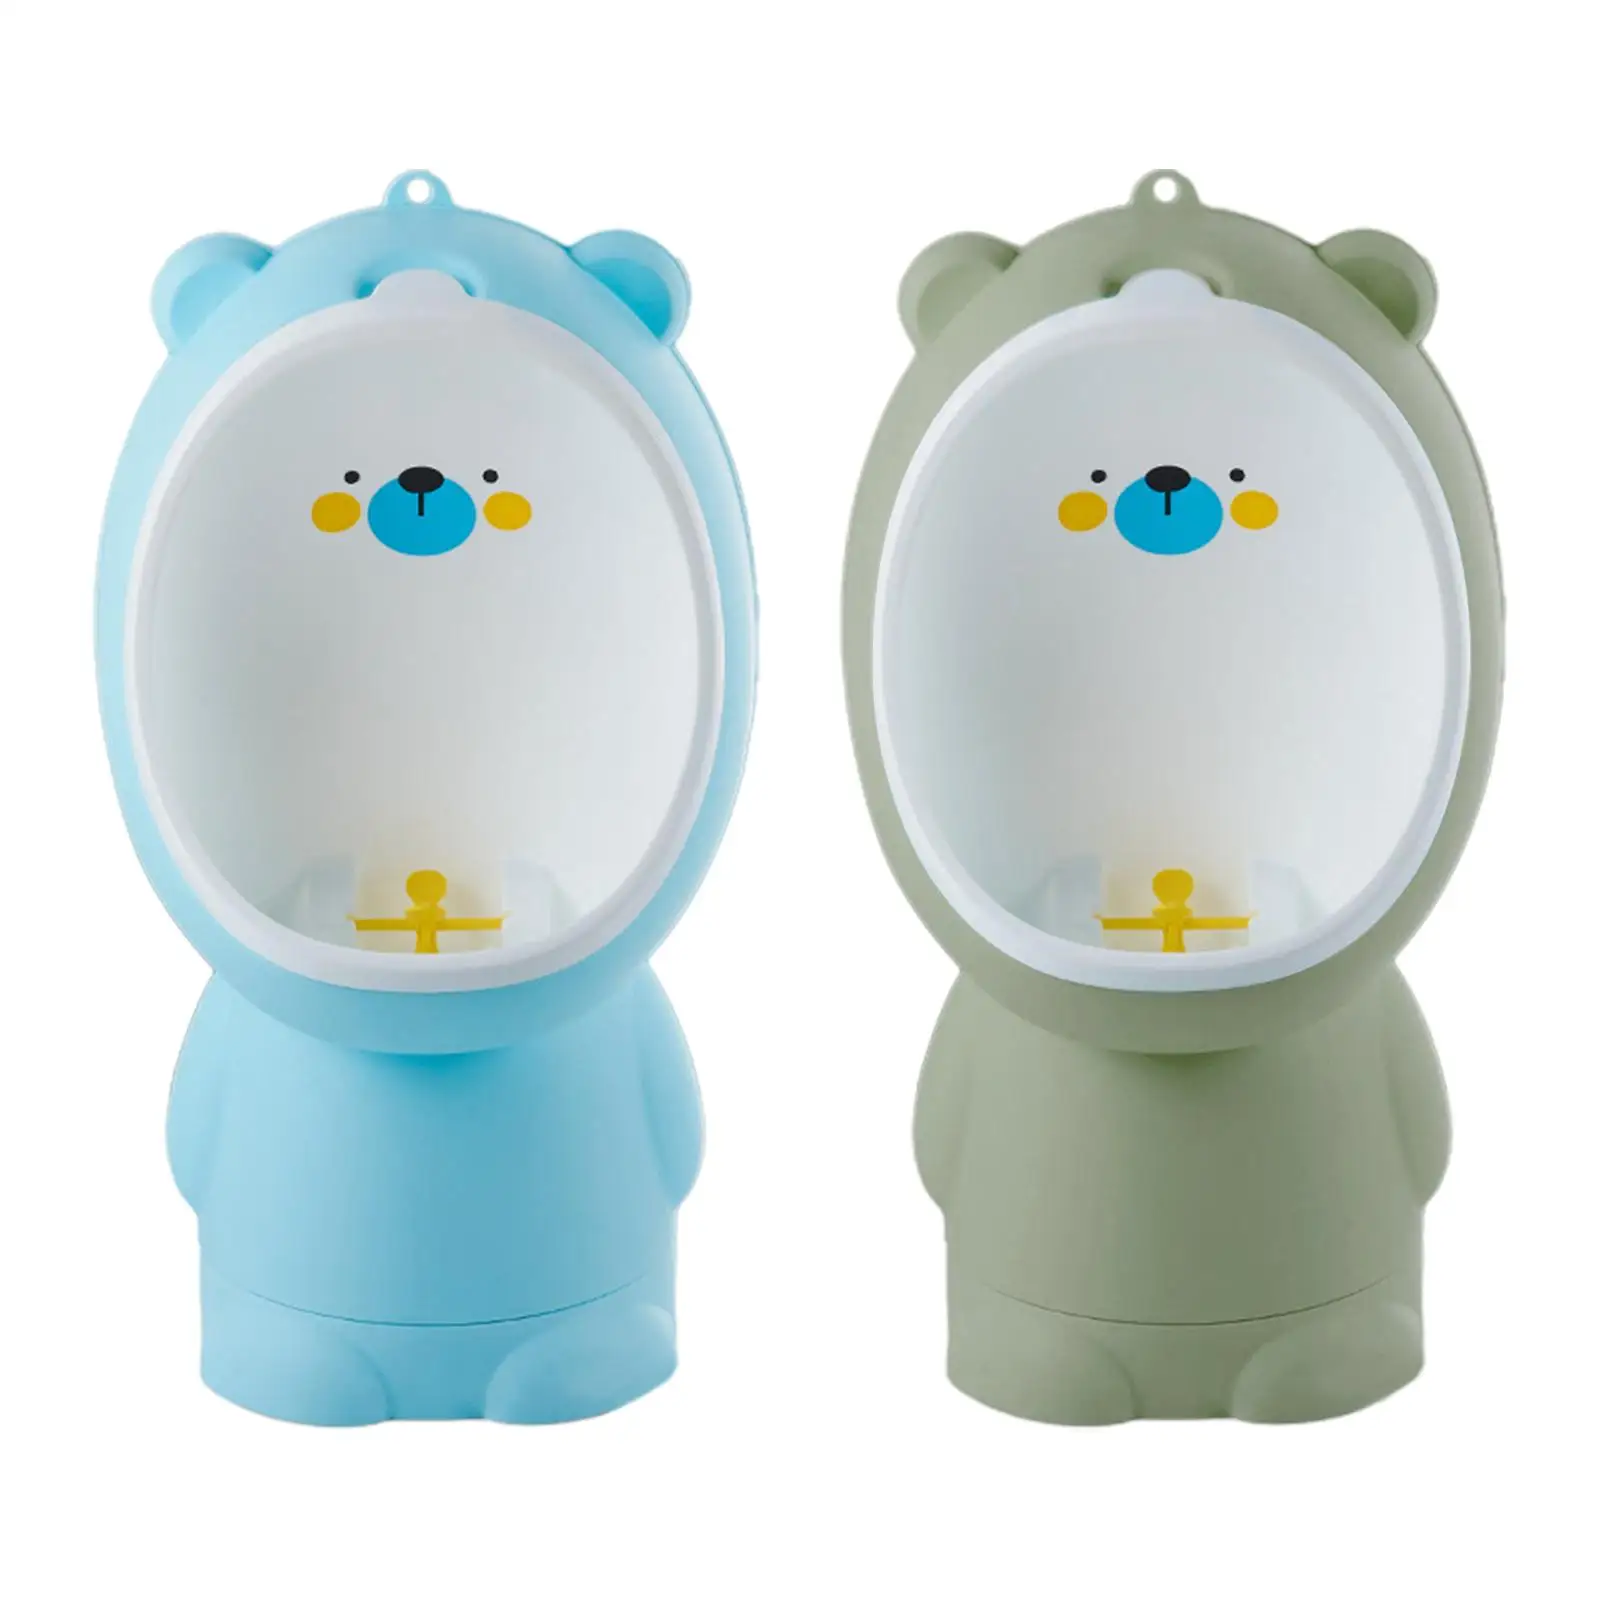 Children Stand Vertical Urinal with Aiming Target Potty Trainer Urinal Hanging Pee Trainer for Boys Baby Kids Toddlers Child